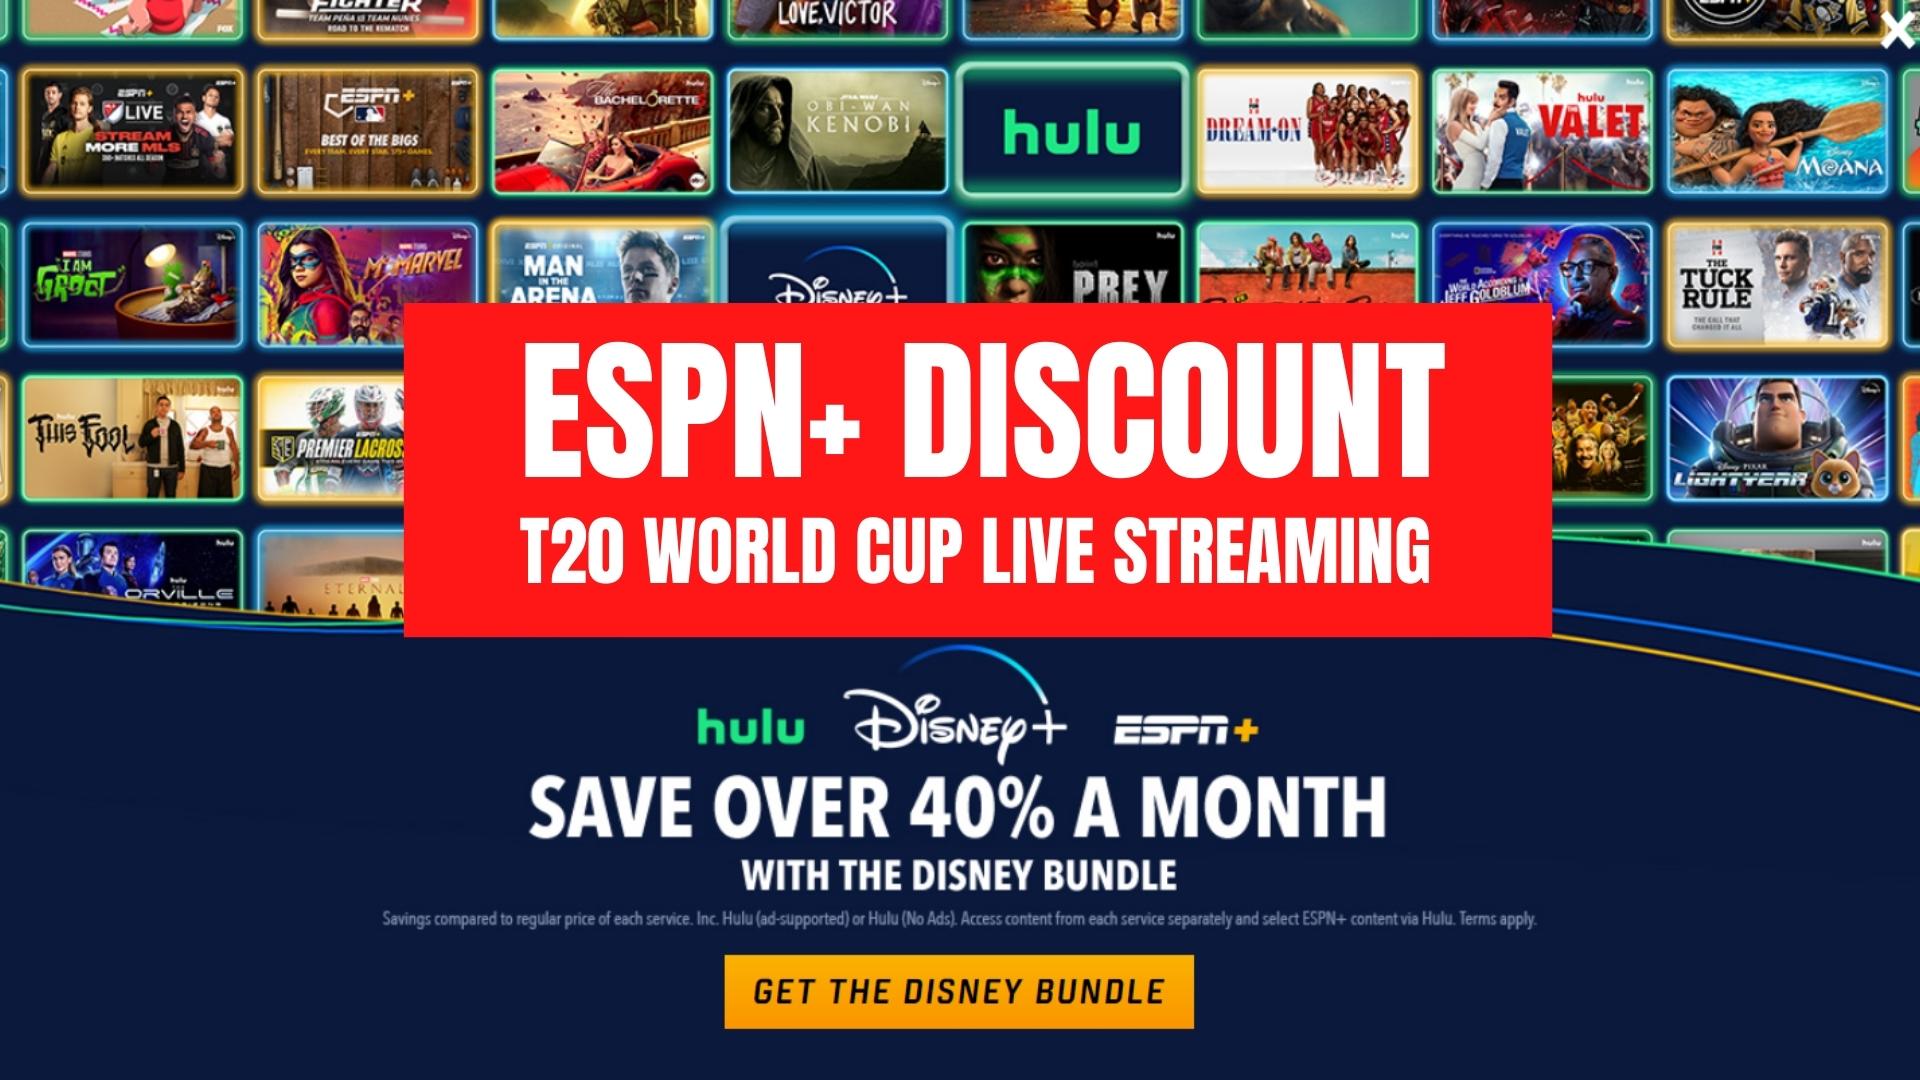 How to Watch T20 World Cup Live Streaming in USA on ESPN+ 40% Discount